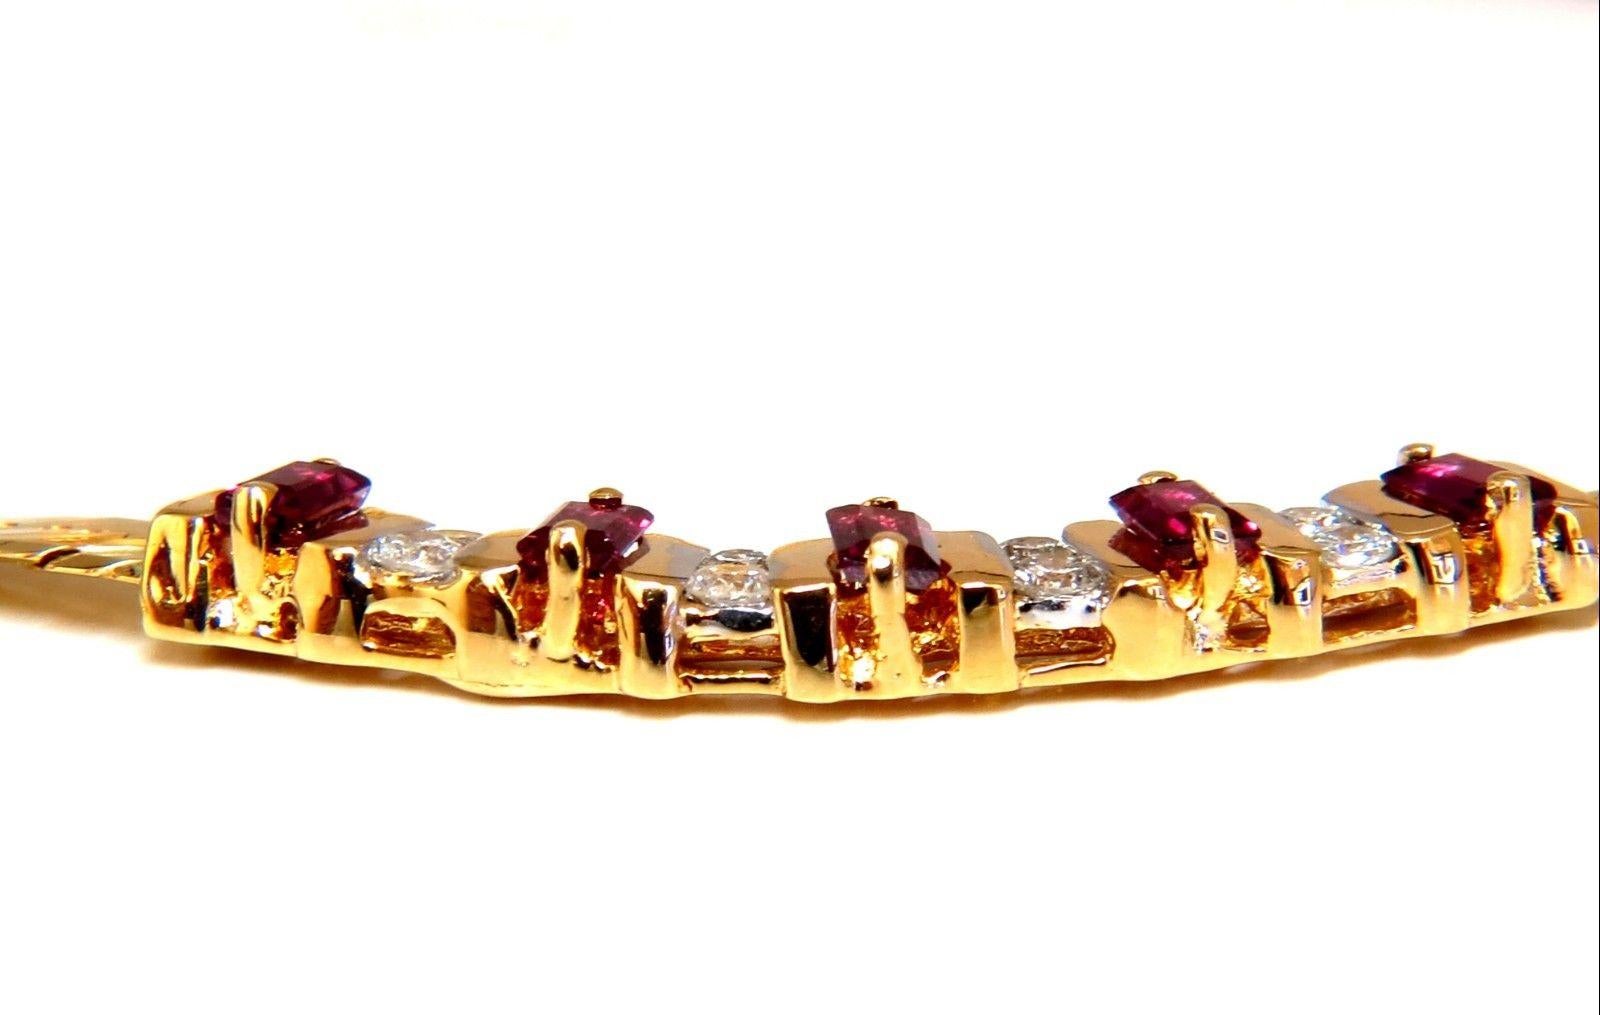 Herringbone Flat

.50ct Natural Emerald cut Ruby necklace.

.50ct. Natural round diamonds.

G-color Vs-2 clarity.

Rounds & full cuts, Classic blood red.

14kt. Yellow gold

14.2 grams 

$5,000 appraisal will accompany

17 inches = wearable